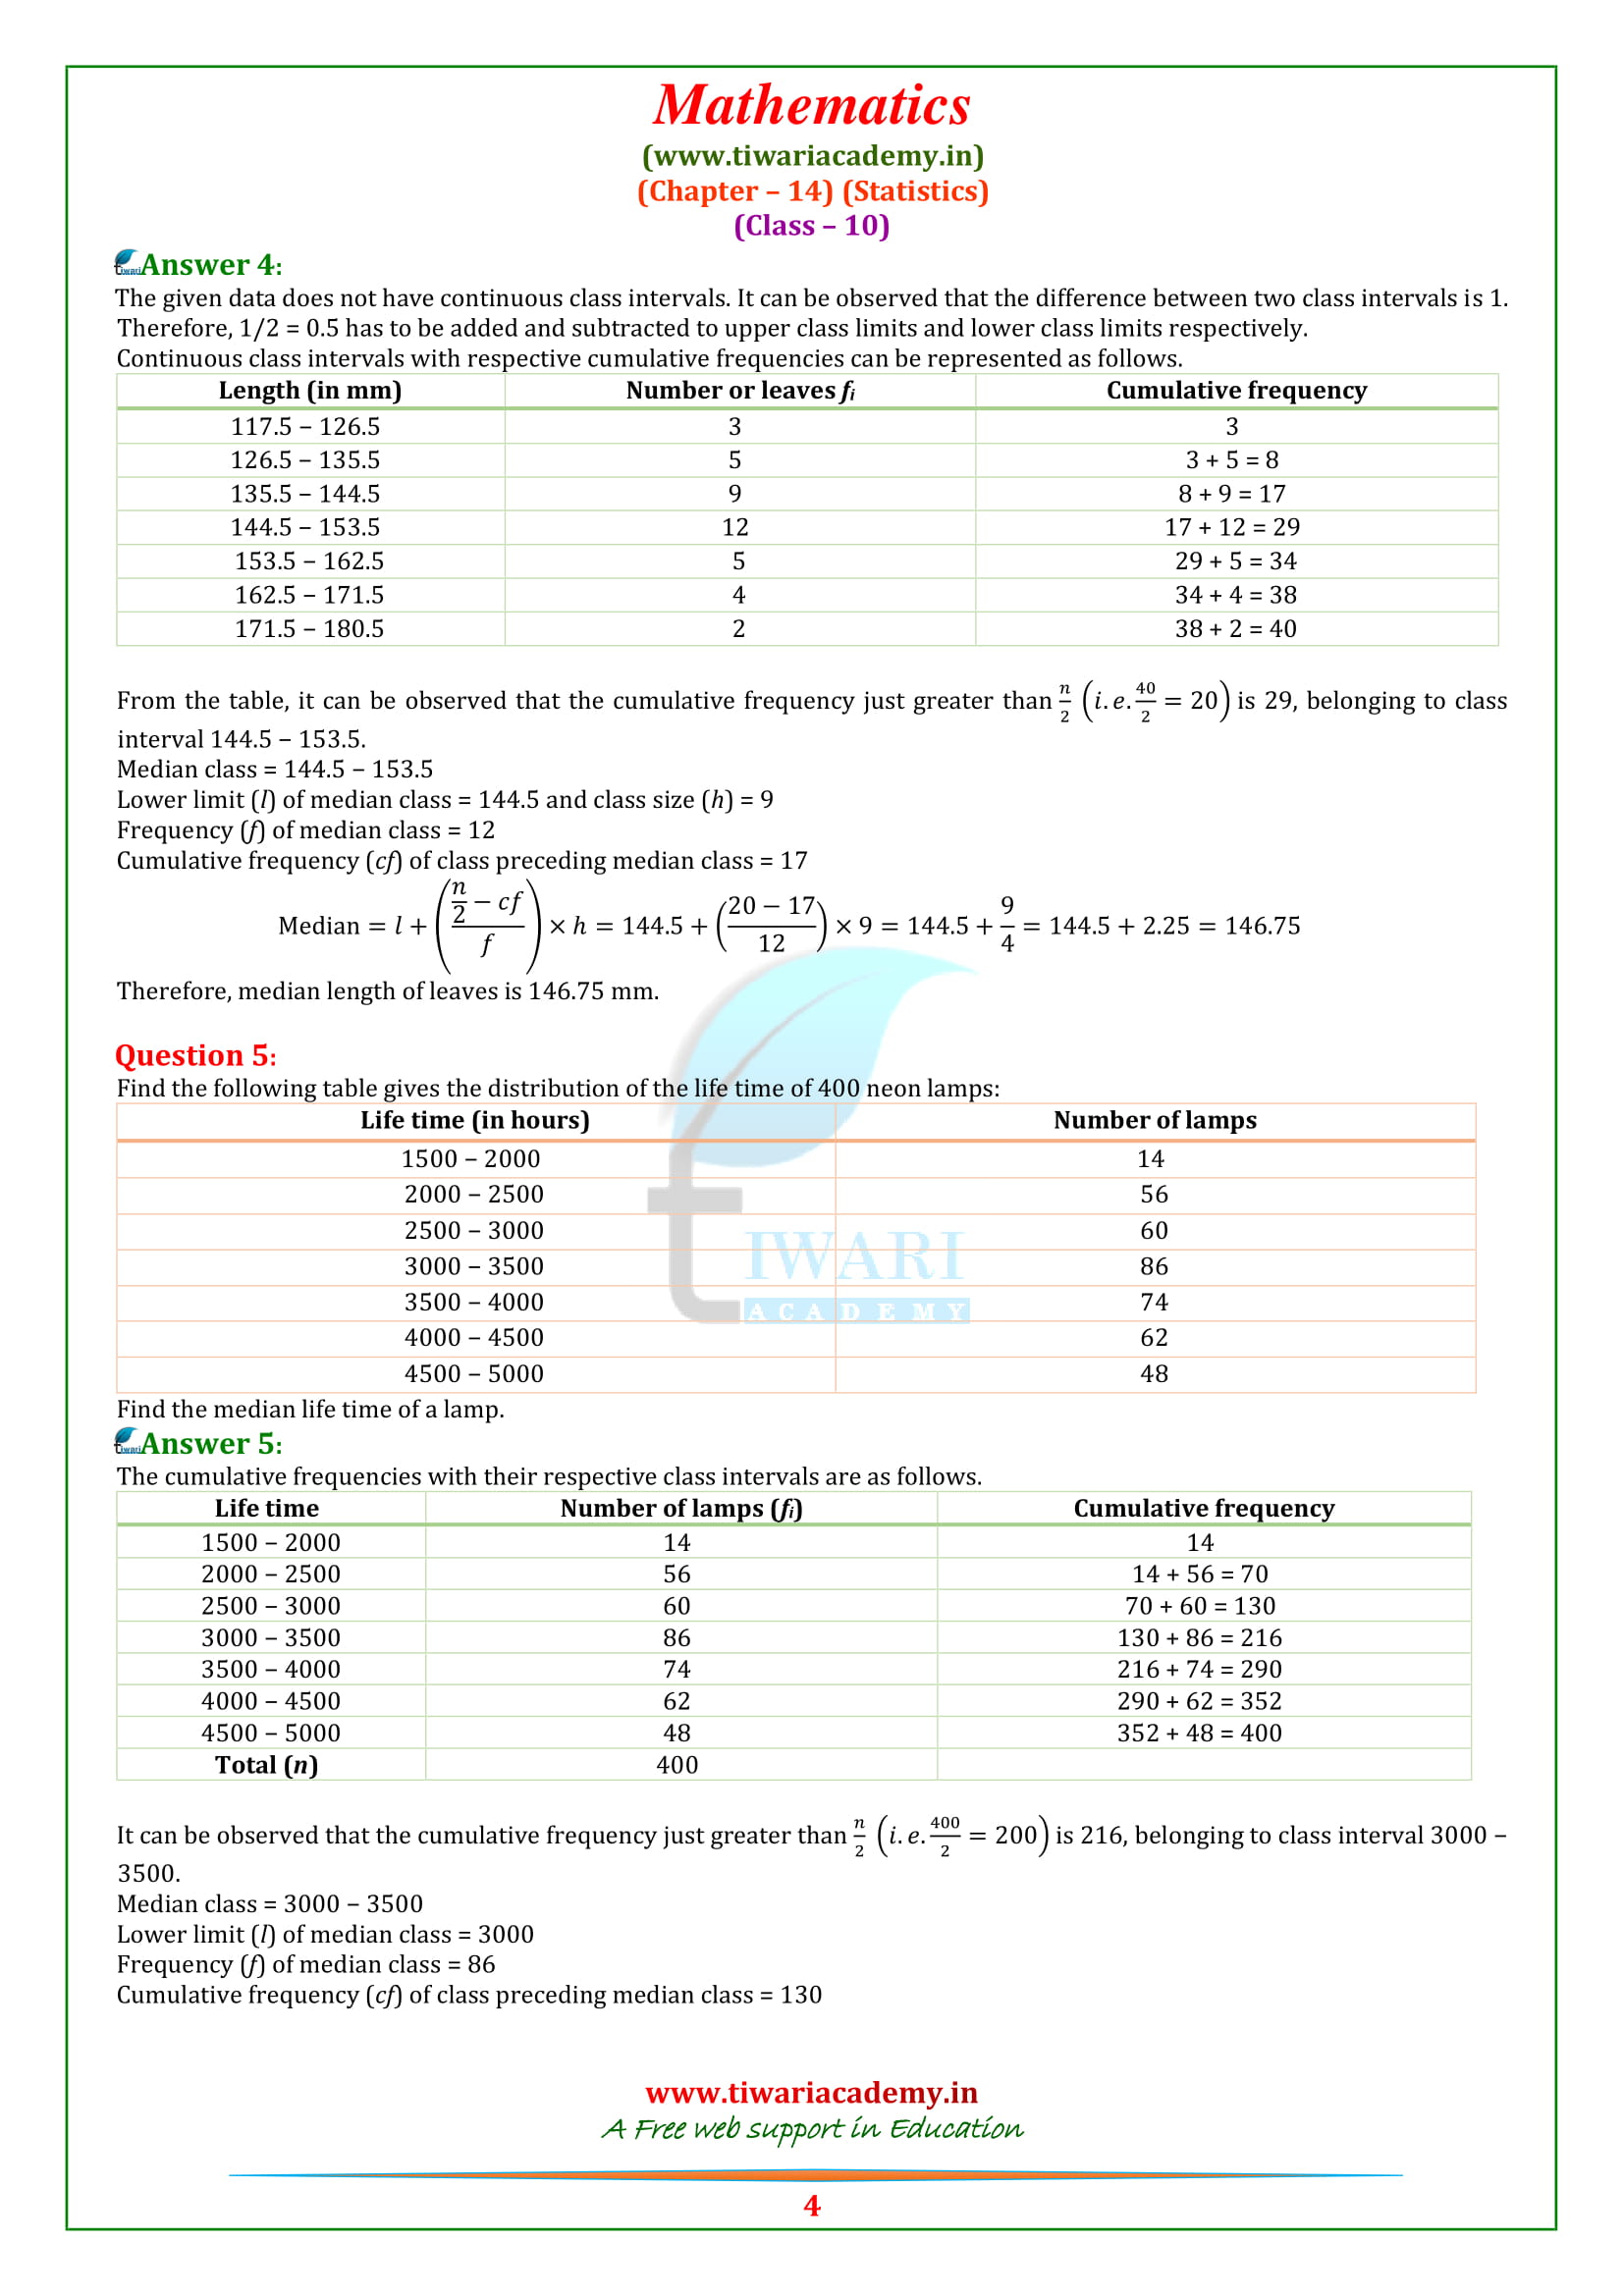 NCERT Solutions for Class 10 Maths Chapter 14 Exercise 14.3 statistics updated for 2020 – 2021